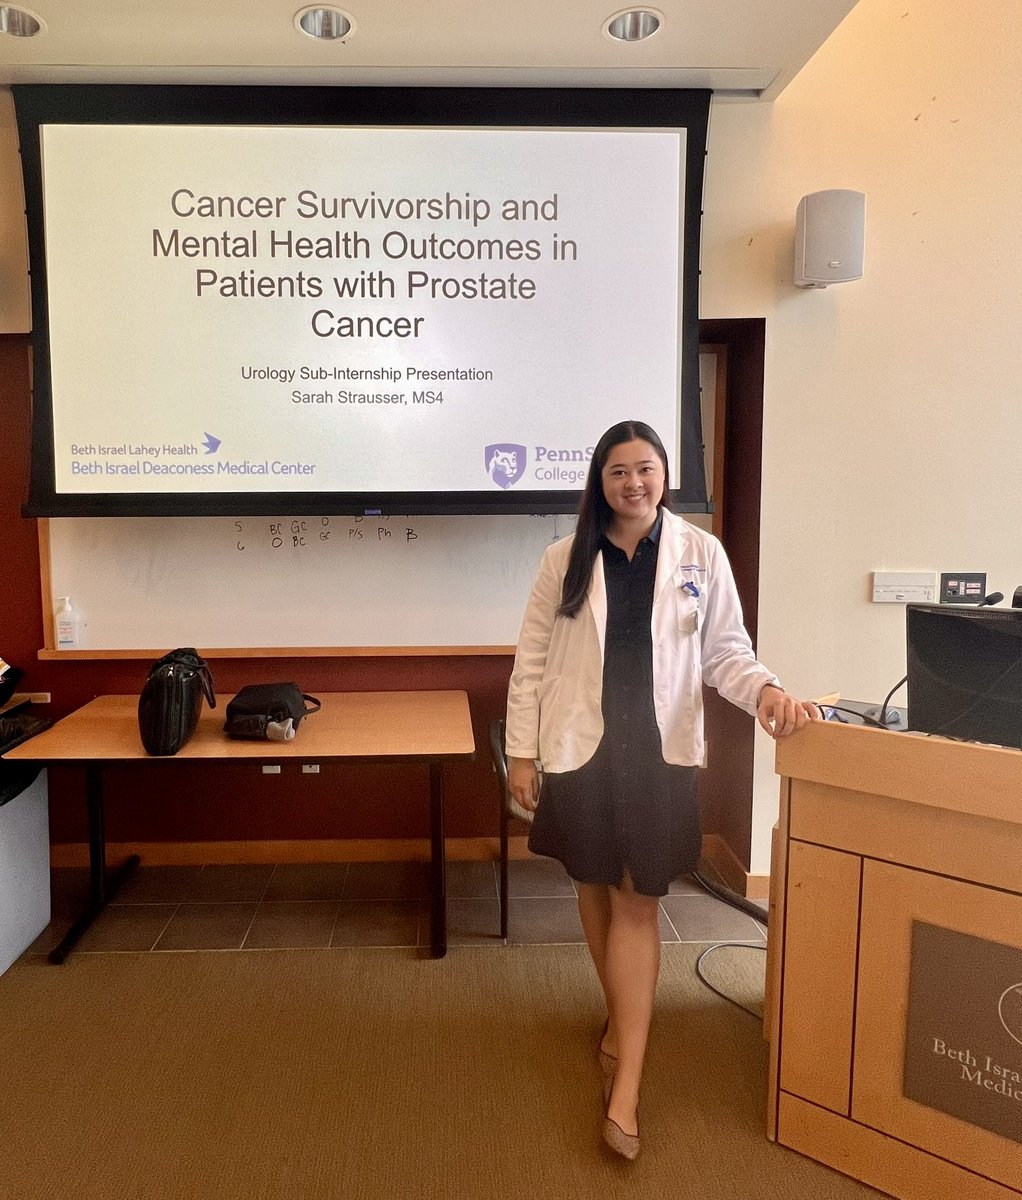 Wrapped up my final sub I with a presentation on a topic very important to me! Takeaways: -Cancer survivorship is often psychologically distressing in addition to physical challenging -Patients should be routinely assessed for mental health outcomes after radical prostatectomy